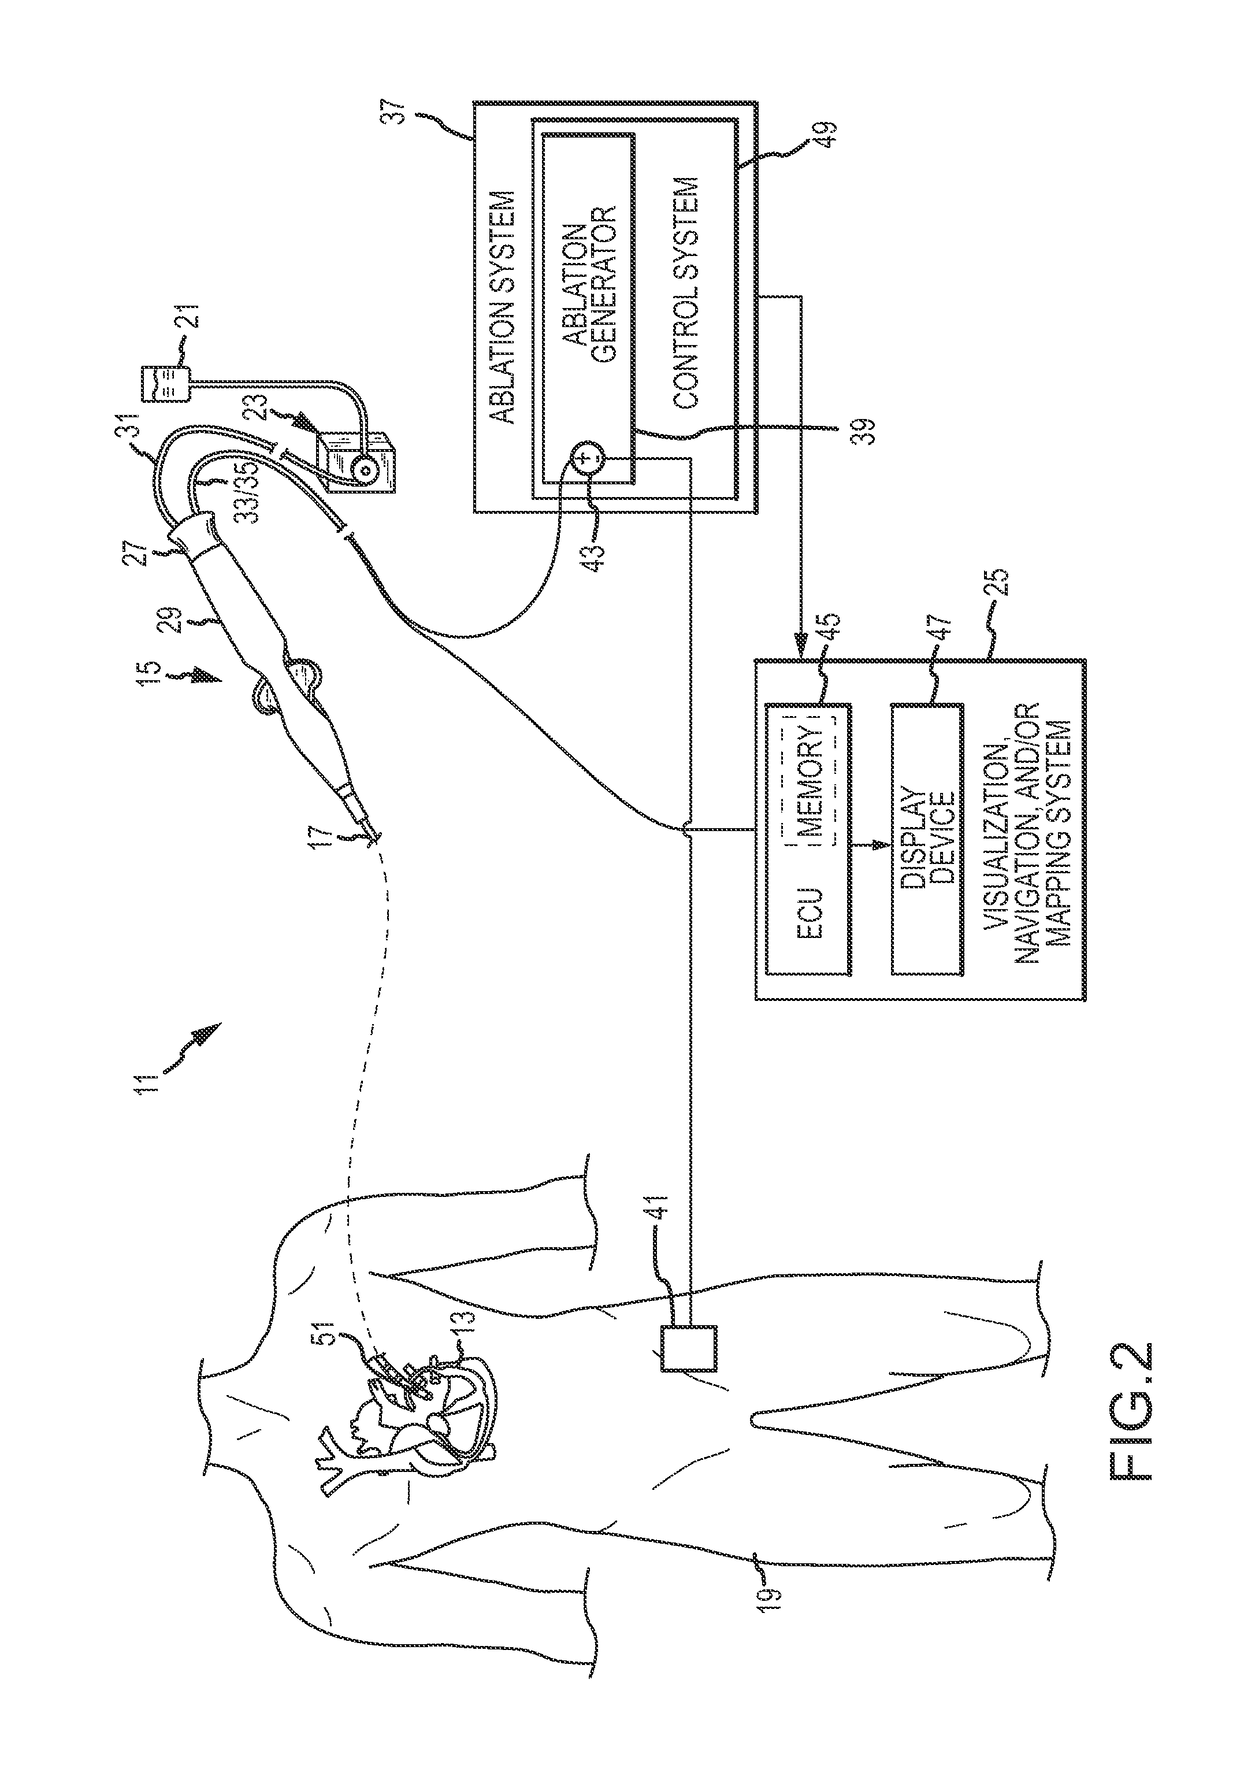 Multi-rate fluid flow and variable power delivery for ablation electrode assemblies used in catheter ablation procedures